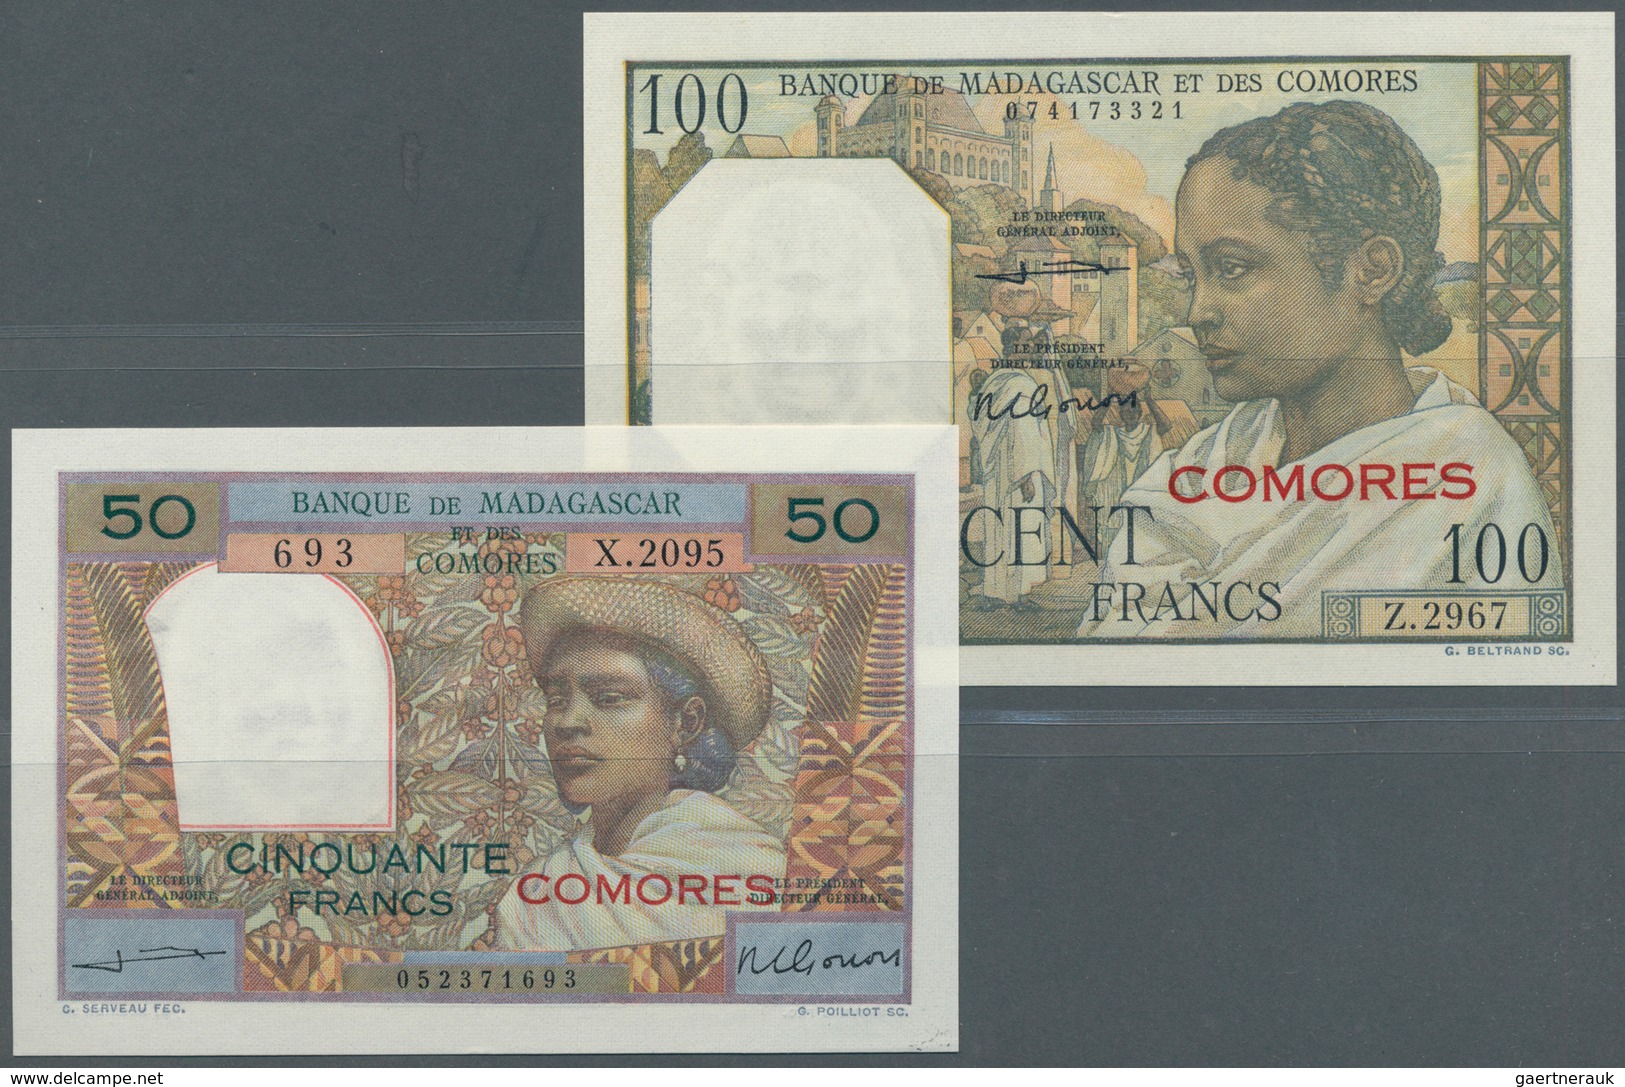 01316 Comoros / Komoren: Set Of 2 Banknotes Containing 50 And 100 Francs ND(1960-63), Both In Condition: U - Comore